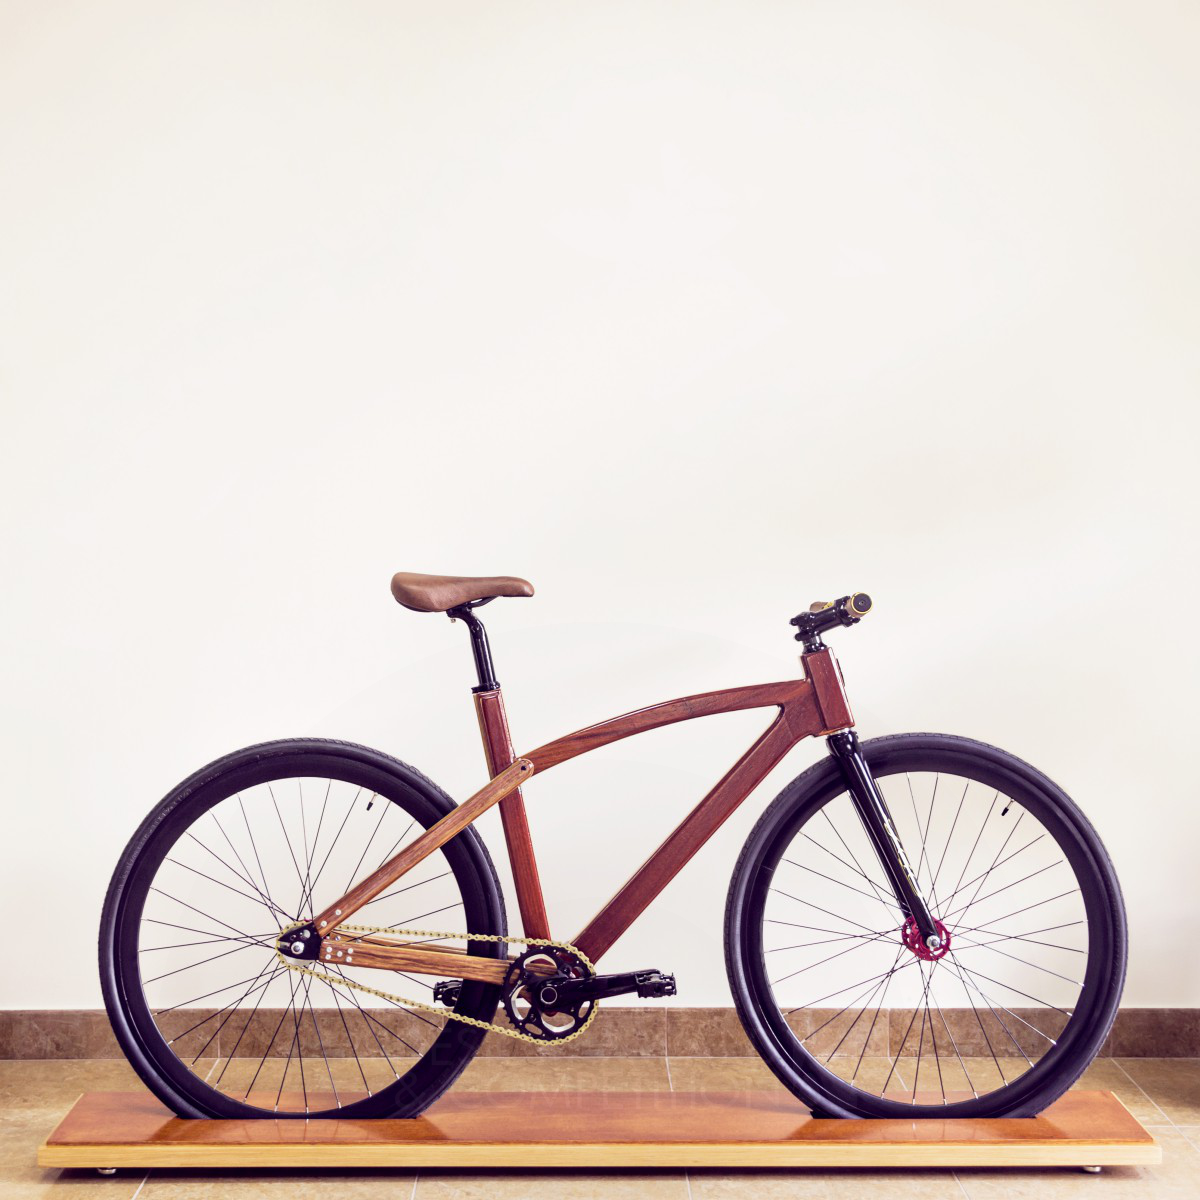 FRB Custom Wooden Bicycle by Konstantinos G. Papadopoulos